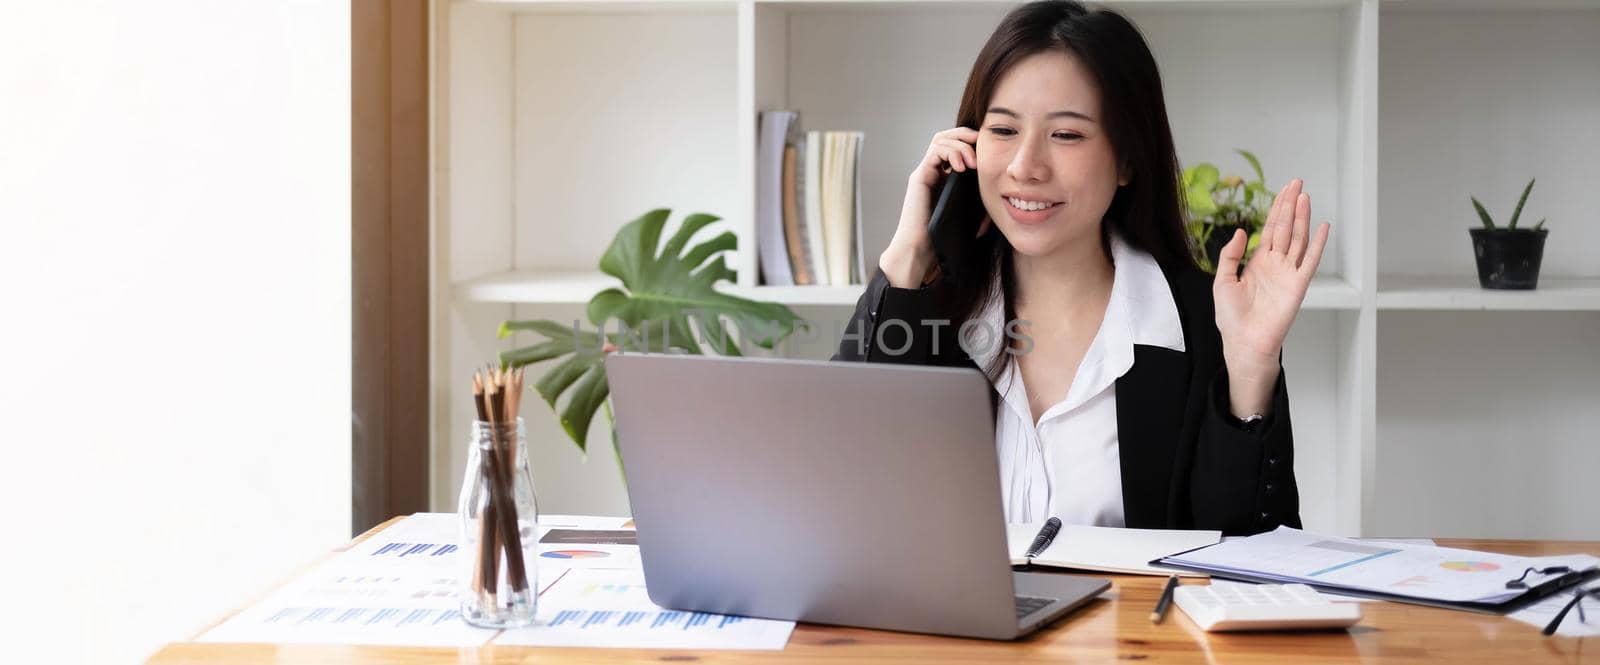 Protrait of Beautiful businesswoman sitting at desk and working with laptop computer..